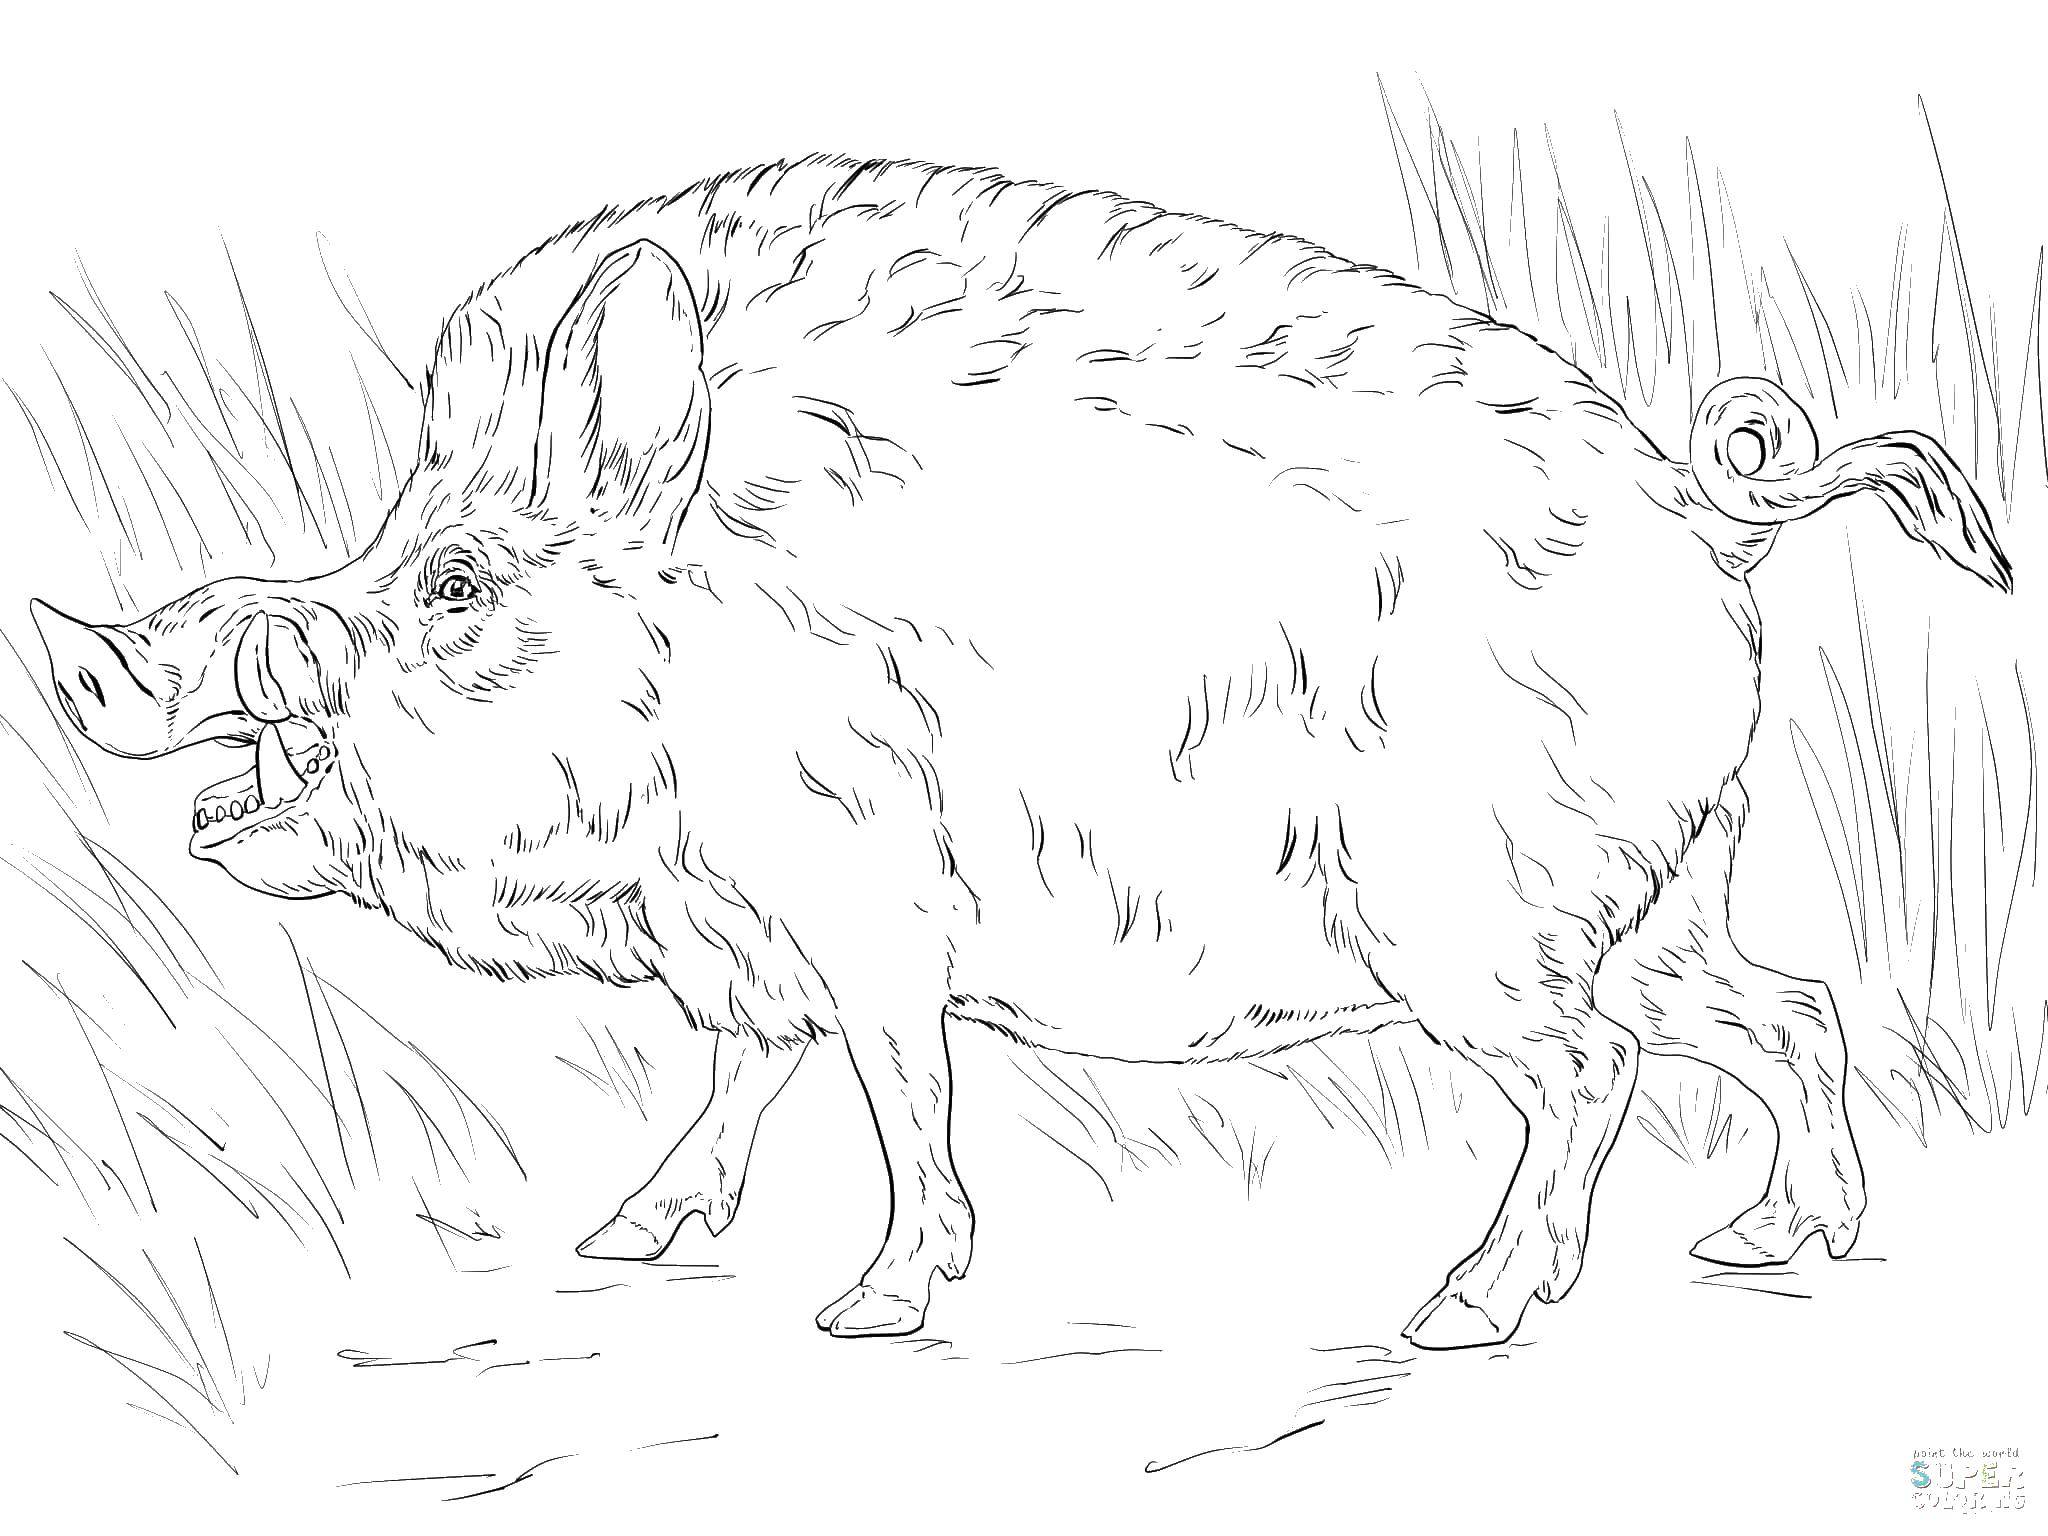 Coloring Boar. Category Animals. Tags:  animals wild boar.